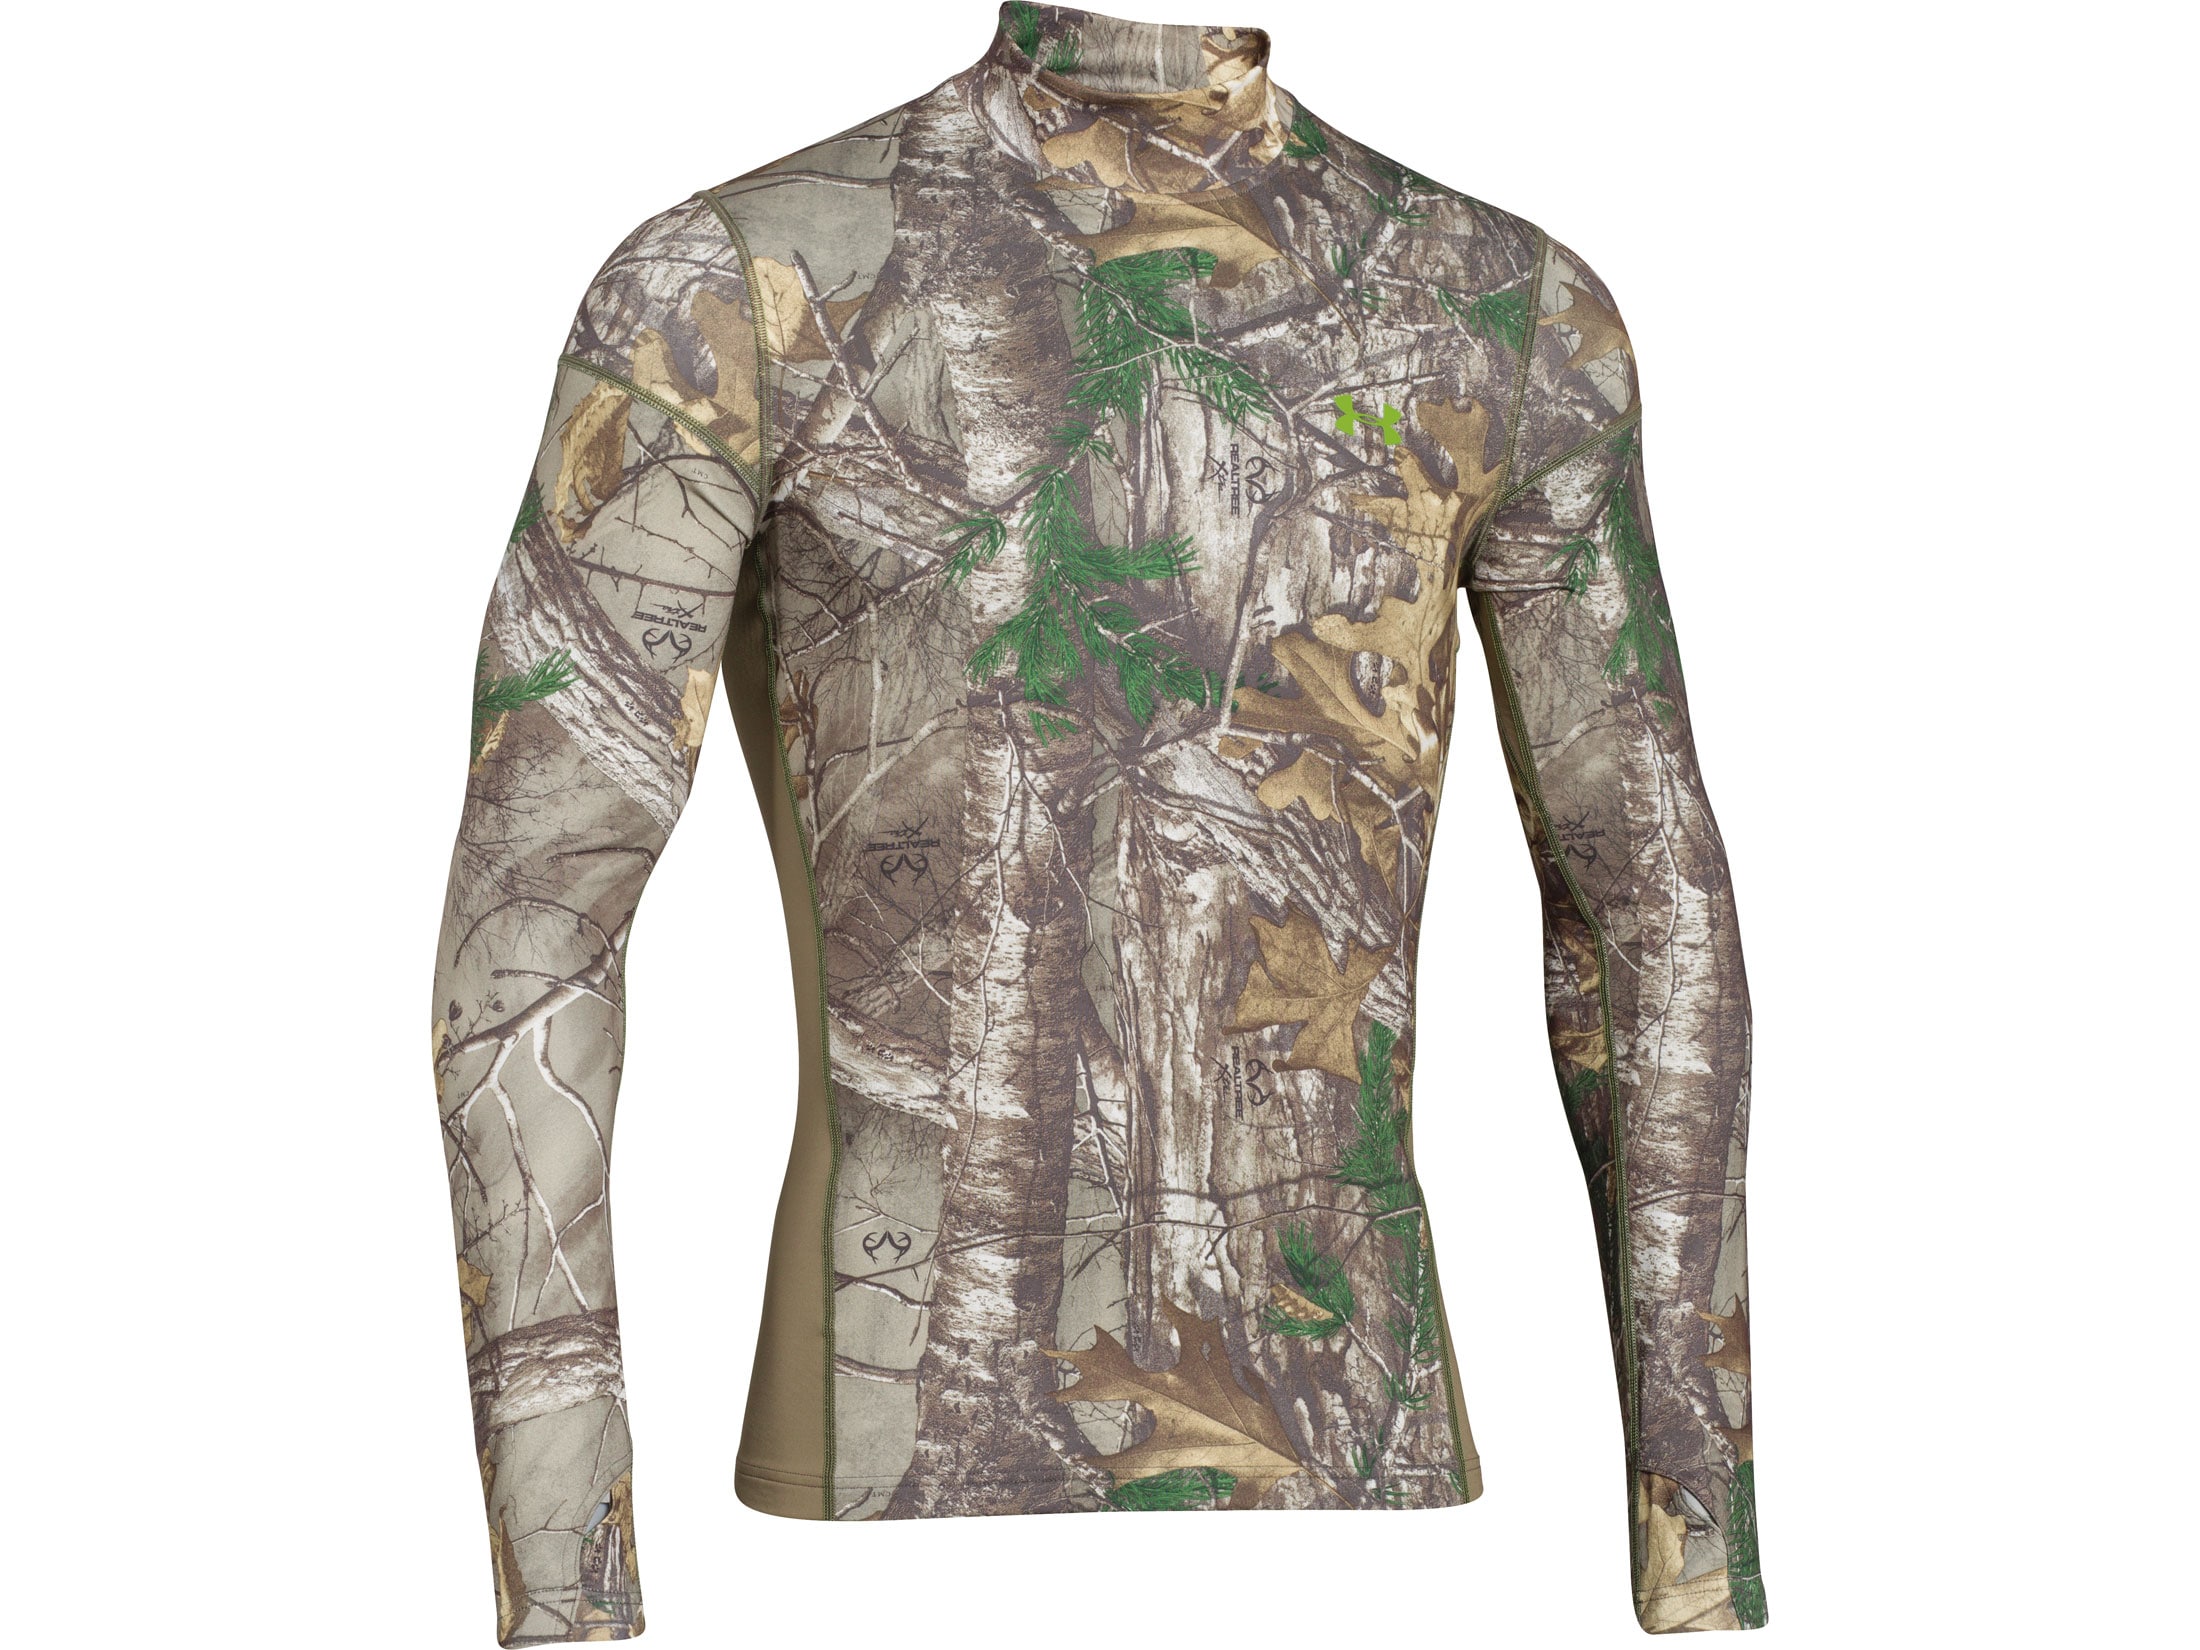 Under Armour Men's ColdGear Infrared Scent Control Tevo Mock Shirt